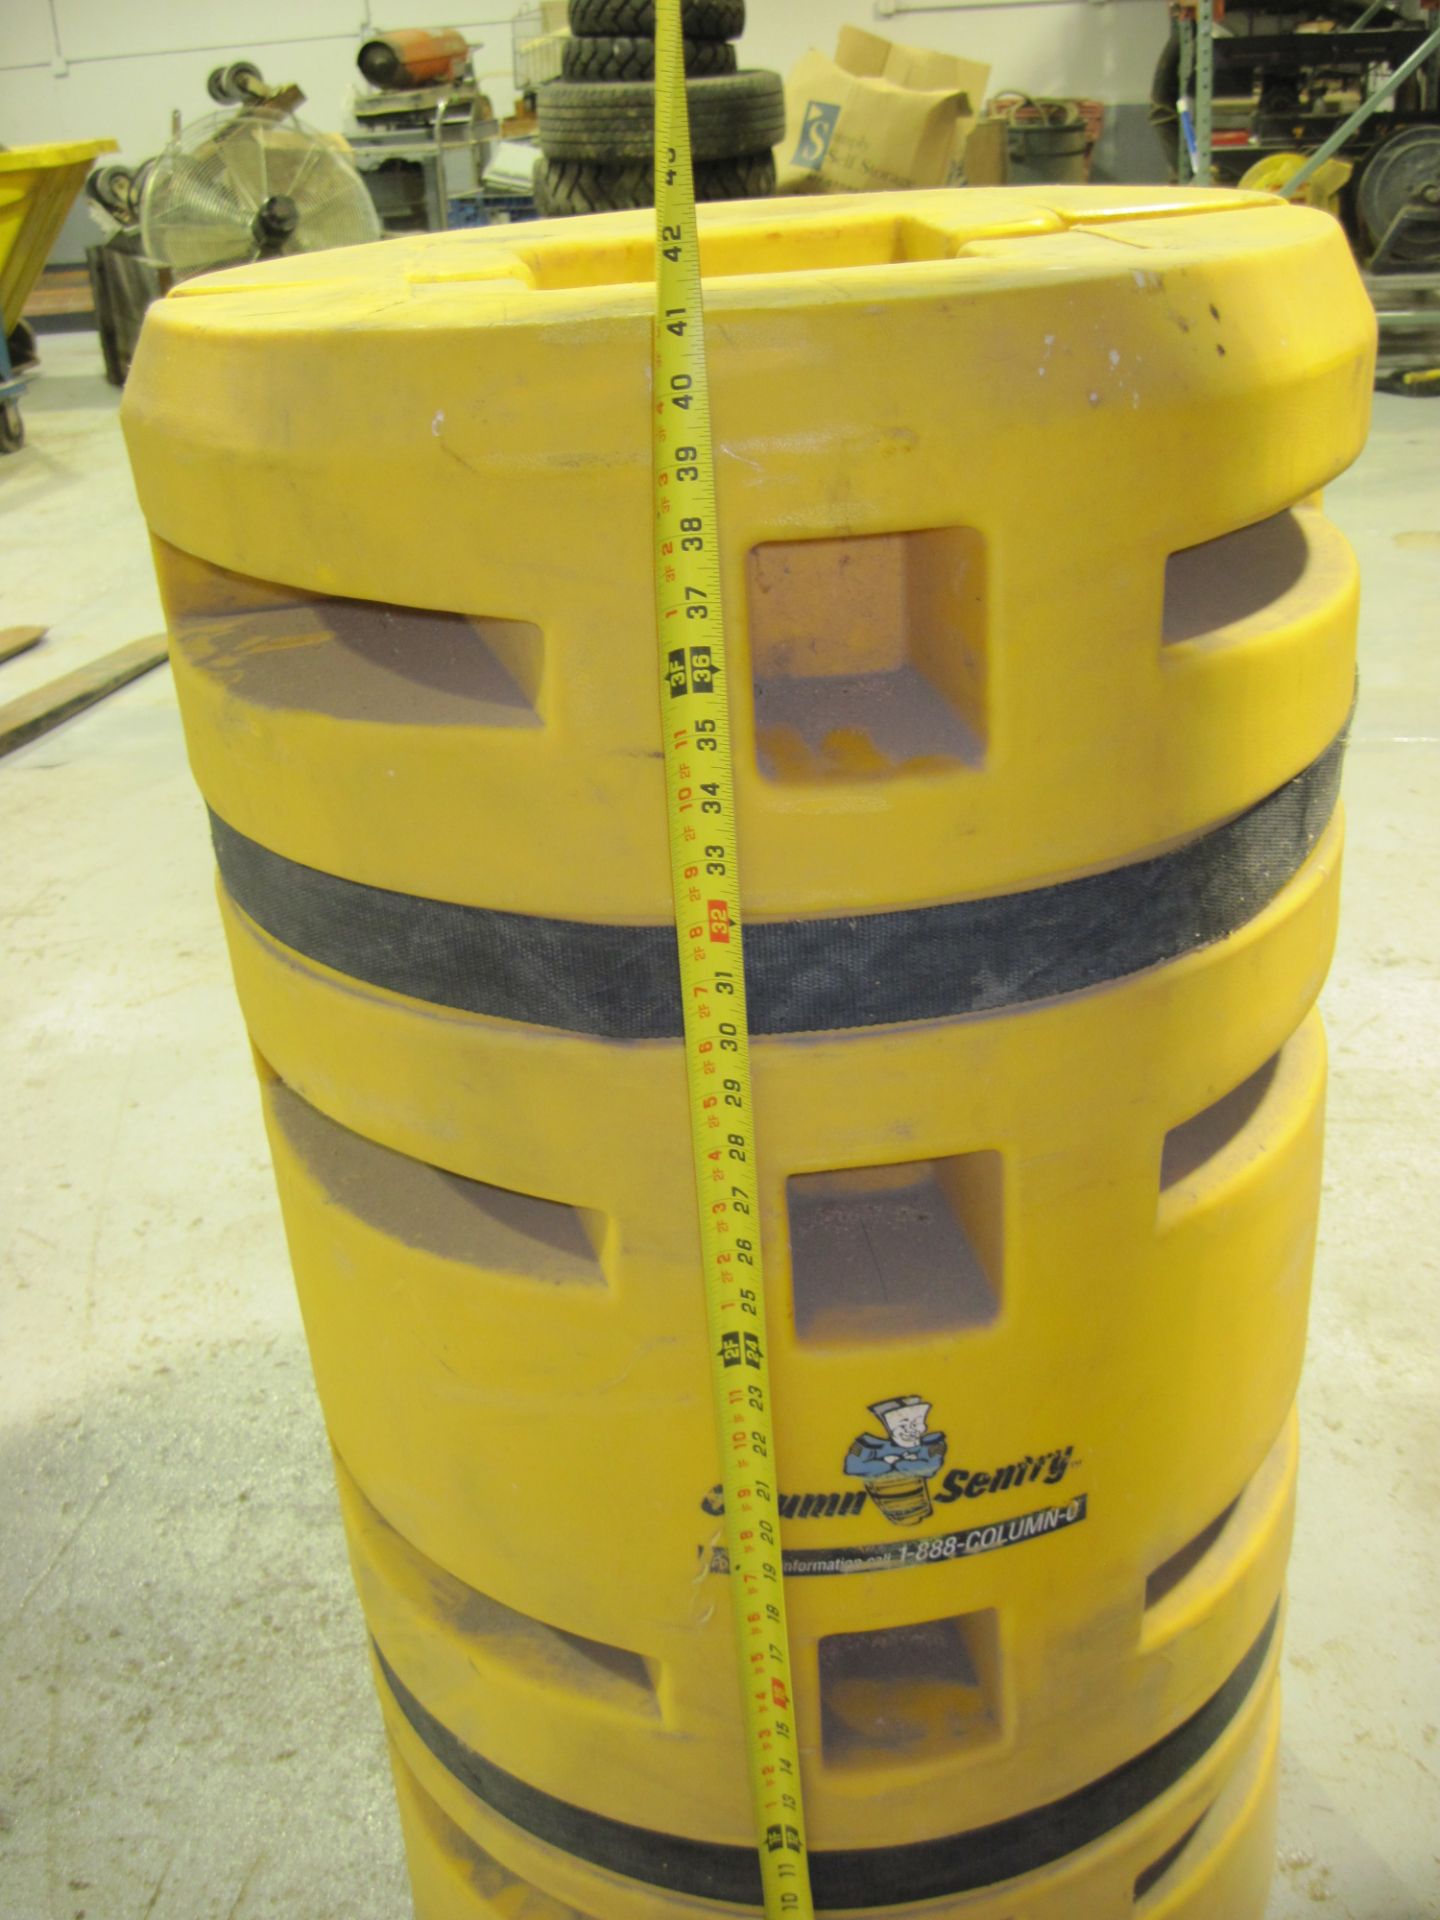 Column Sentry fork truck column protector with straps (Loc. R1EWT1) - Image 5 of 6